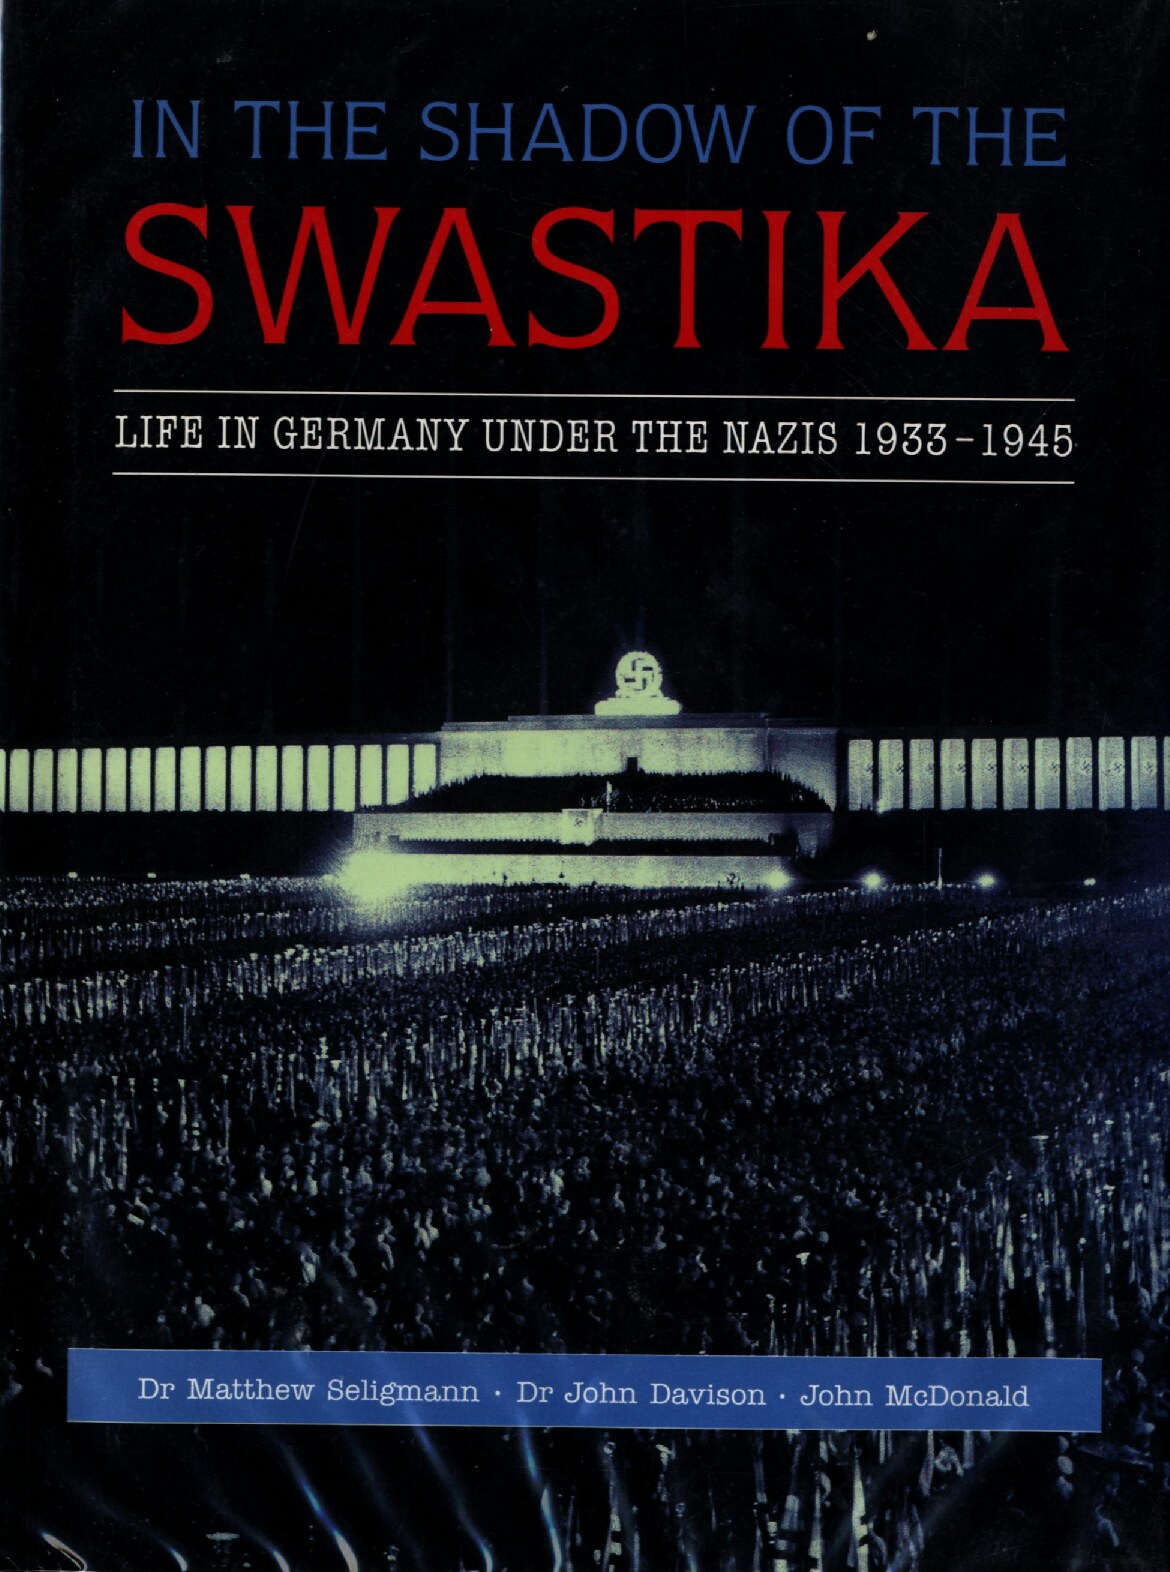 Seligmann, Matthew; In The Shadow Of The Swastika - Life In Germany Under The Nazis 1933 - 1945